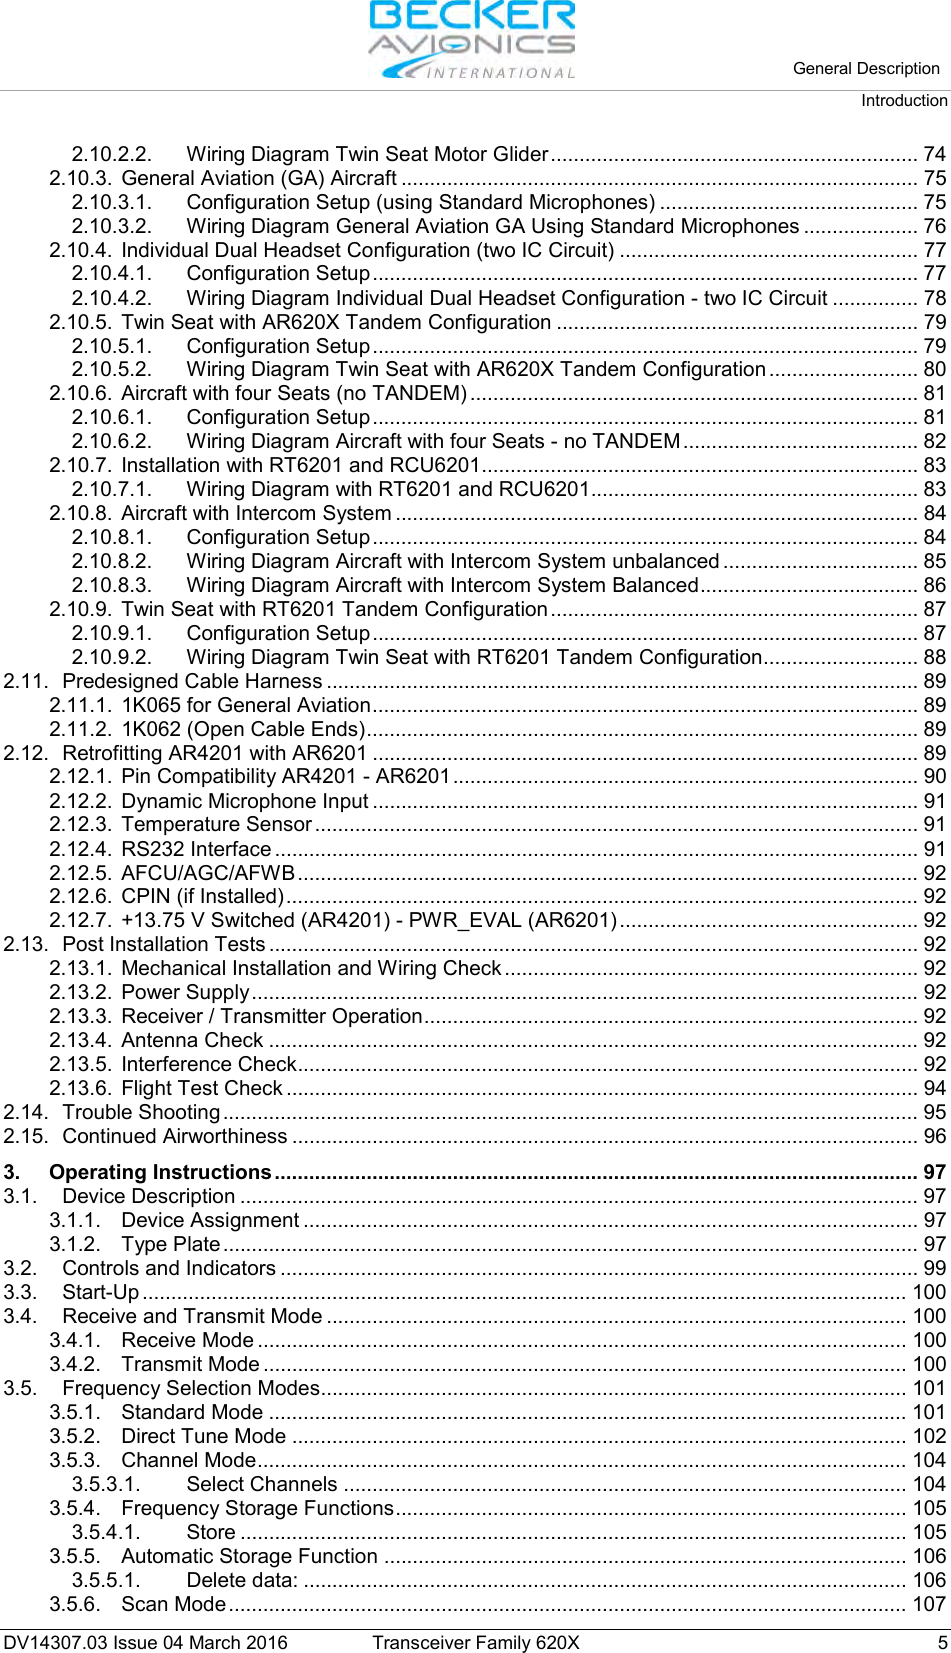   General Description Introduction  DV14307.03 Issue 04 March 2016 Transceiver Family 620X  5 2.10.2.2. Wiring Diagram Twin Seat Motor Glider ................................................................ 74 2.10.3. General Aviation (GA) Aircraft .......................................................................................... 75 2.10.3.1. Configuration Setup (using Standard Microphones) ............................................. 75 2.10.3.2. Wiring Diagram General Aviation GA Using Standard Microphones .................... 76 2.10.4. Individual Dual Headset Configuration (two IC Circuit) .................................................... 77 2.10.4.1. Configuration Setup ............................................................................................... 77 2.10.4.2. Wiring Diagram Individual Dual Headset Configuration - two IC Circuit ............... 78 2.10.5. Twin Seat with AR620X Tandem Configuration ............................................................... 79 2.10.5.1. Configuration Setup ............................................................................................... 79 2.10.5.2. Wiring Diagram Twin Seat with AR620X Tandem Configuration .......................... 80 2.10.6. Aircraft with four Seats (no TANDEM) .............................................................................. 81 2.10.6.1. Configuration Setup ............................................................................................... 81 2.10.6.2. Wiring Diagram Aircraft with four Seats - no TANDEM ......................................... 82 2.10.7. Installation with RT6201 and RCU6201 ............................................................................ 83 2.10.7.1. Wiring Diagram with RT6201 and RCU6201......................................................... 83 2.10.8. Aircraft with Intercom System ........................................................................................... 84 2.10.8.1. Configuration Setup ............................................................................................... 84 2.10.8.2. Wiring Diagram Aircraft with Intercom System unbalanced .................................. 85 2.10.8.3. Wiring Diagram Aircraft with Intercom System Balanced ...................................... 86 2.10.9. Twin Seat with RT6201 Tandem Configuration ................................................................ 87 2.10.9.1. Configuration Setup ............................................................................................... 87 2.10.9.2. Wiring Diagram Twin Seat with RT6201 Tandem Configuration ........................... 88 2.11. Predesigned Cable Harness ....................................................................................................... 89 2.11.1. 1K065 for General Aviation ............................................................................................... 89 2.11.2. 1K062 (Open Cable Ends) ................................................................................................ 89 2.12. Retrofitting AR4201 with AR6201 ............................................................................................... 89 2.12.1. Pin Compatibility AR4201 - AR6201 ................................................................................. 90 2.12.2. Dynamic Microphone Input ............................................................................................... 91 2.12.3. Temperature Sensor ......................................................................................................... 91 2.12.4. RS232 Interface ................................................................................................................ 91 2.12.5. AFCU/AGC/AFWB ............................................................................................................ 92 2.12.6. CPIN (if Installed) .............................................................................................................. 92 2.12.7. +13.75 V Switched (AR4201) - PWR_EVAL (AR6201) .................................................... 92 2.13. Post Installation Tests ................................................................................................................. 92 2.13.1. Mechanical Installation and Wiring Check ........................................................................ 92 2.13.2. Power Supply .................................................................................................................... 92 2.13.3. Receiver / Transmitter Operation ...................................................................................... 92 2.13.4. Antenna Check ................................................................................................................. 92 2.13.5. Interference Check ............................................................................................................ 92 2.13.6. Flight Test Check .............................................................................................................. 94 2.14. Trouble Shooting ......................................................................................................................... 95 2.15. Continued Airworthiness ............................................................................................................. 96 3. Operating Instructions ................................................................................................................ 97 3.1. Device Description ...................................................................................................................... 97 3.1.1. Device Assignment ........................................................................................................... 97 3.1.2. Type Plate ......................................................................................................................... 97 3.2. Controls and Indicators ............................................................................................................... 99 3.3. Start-Up ..................................................................................................................................... 100 3.4. Receive and Transmit Mode ..................................................................................................... 100 3.4.1. Receive Mode ................................................................................................................. 100 3.4.2. Transmit Mode ................................................................................................................ 100 3.5. Frequency Selection Modes...................................................................................................... 101 3.5.1. Standard Mode ............................................................................................................... 101 3.5.2. Direct Tune Mode ........................................................................................................... 102 3.5.3. Channel Mode ................................................................................................................. 104 3.5.3.1. Select Channels .................................................................................................. 104 3.5.4. Frequency Storage Functions ......................................................................................... 105 3.5.4.1. Store .................................................................................................................... 105 3.5.5. Automatic Storage Function ........................................................................................... 106 3.5.5.1. Delete data: ......................................................................................................... 106 3.5.6. Scan Mode ...................................................................................................................... 107 